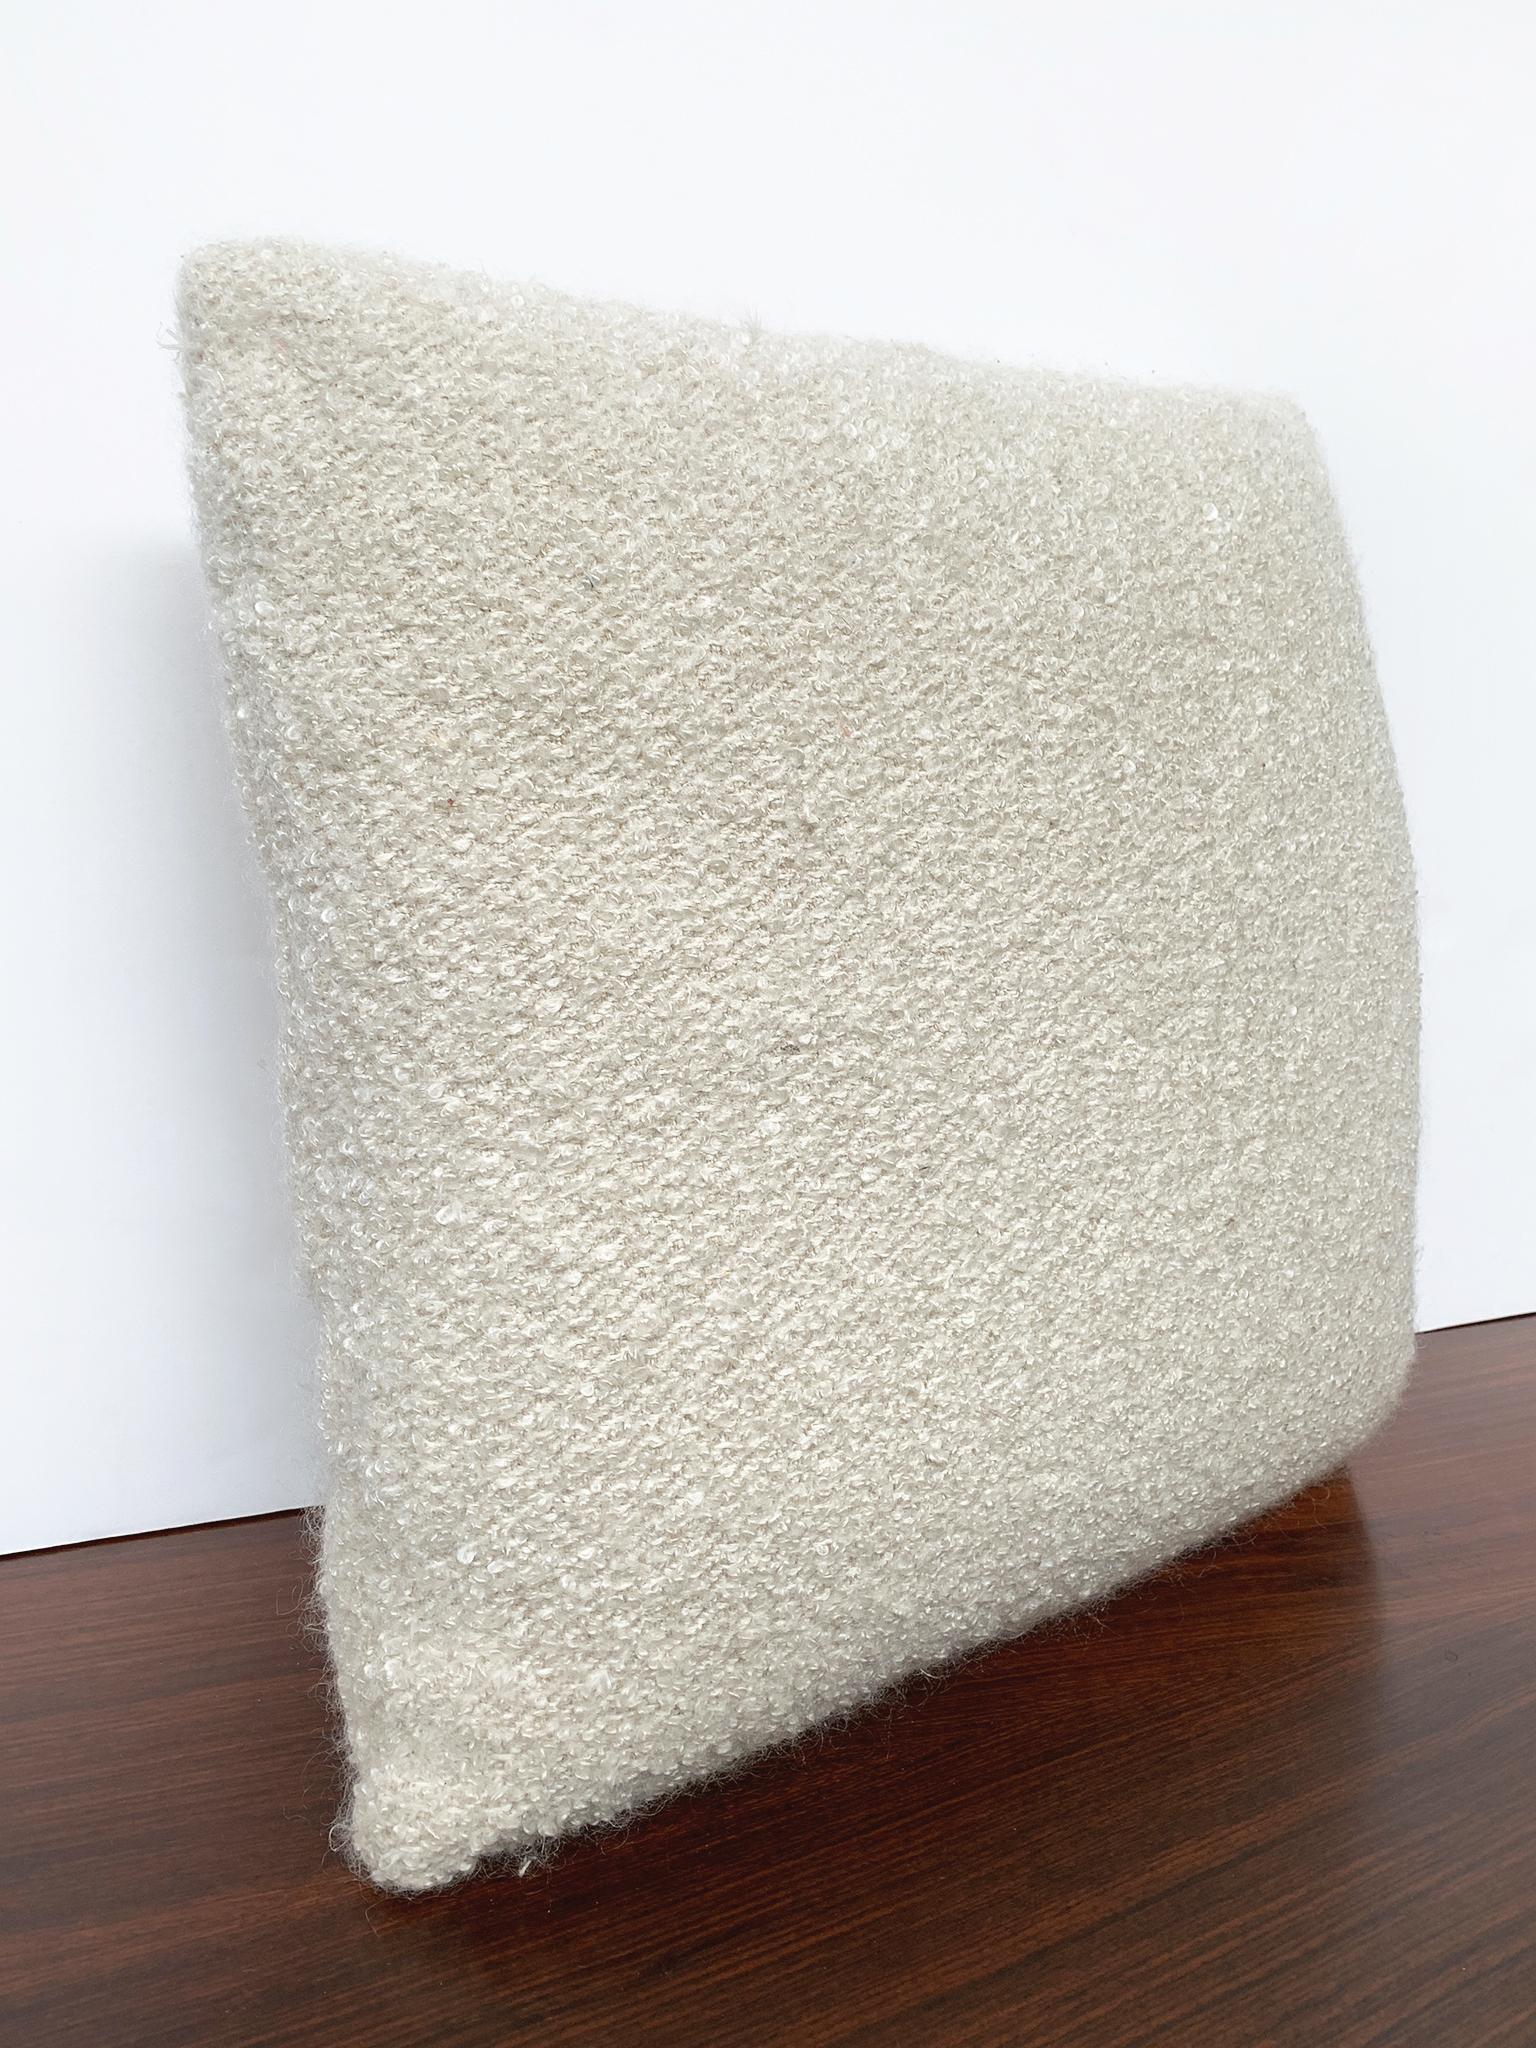 New custom made pillow with a bouclé fabric from Schumacher. The bouclé is soft-textured and has a warm cream-white color. The filling is a combination of foam and down. This is an ideal pillow for lounging comfortably in your sofa or bed. There are